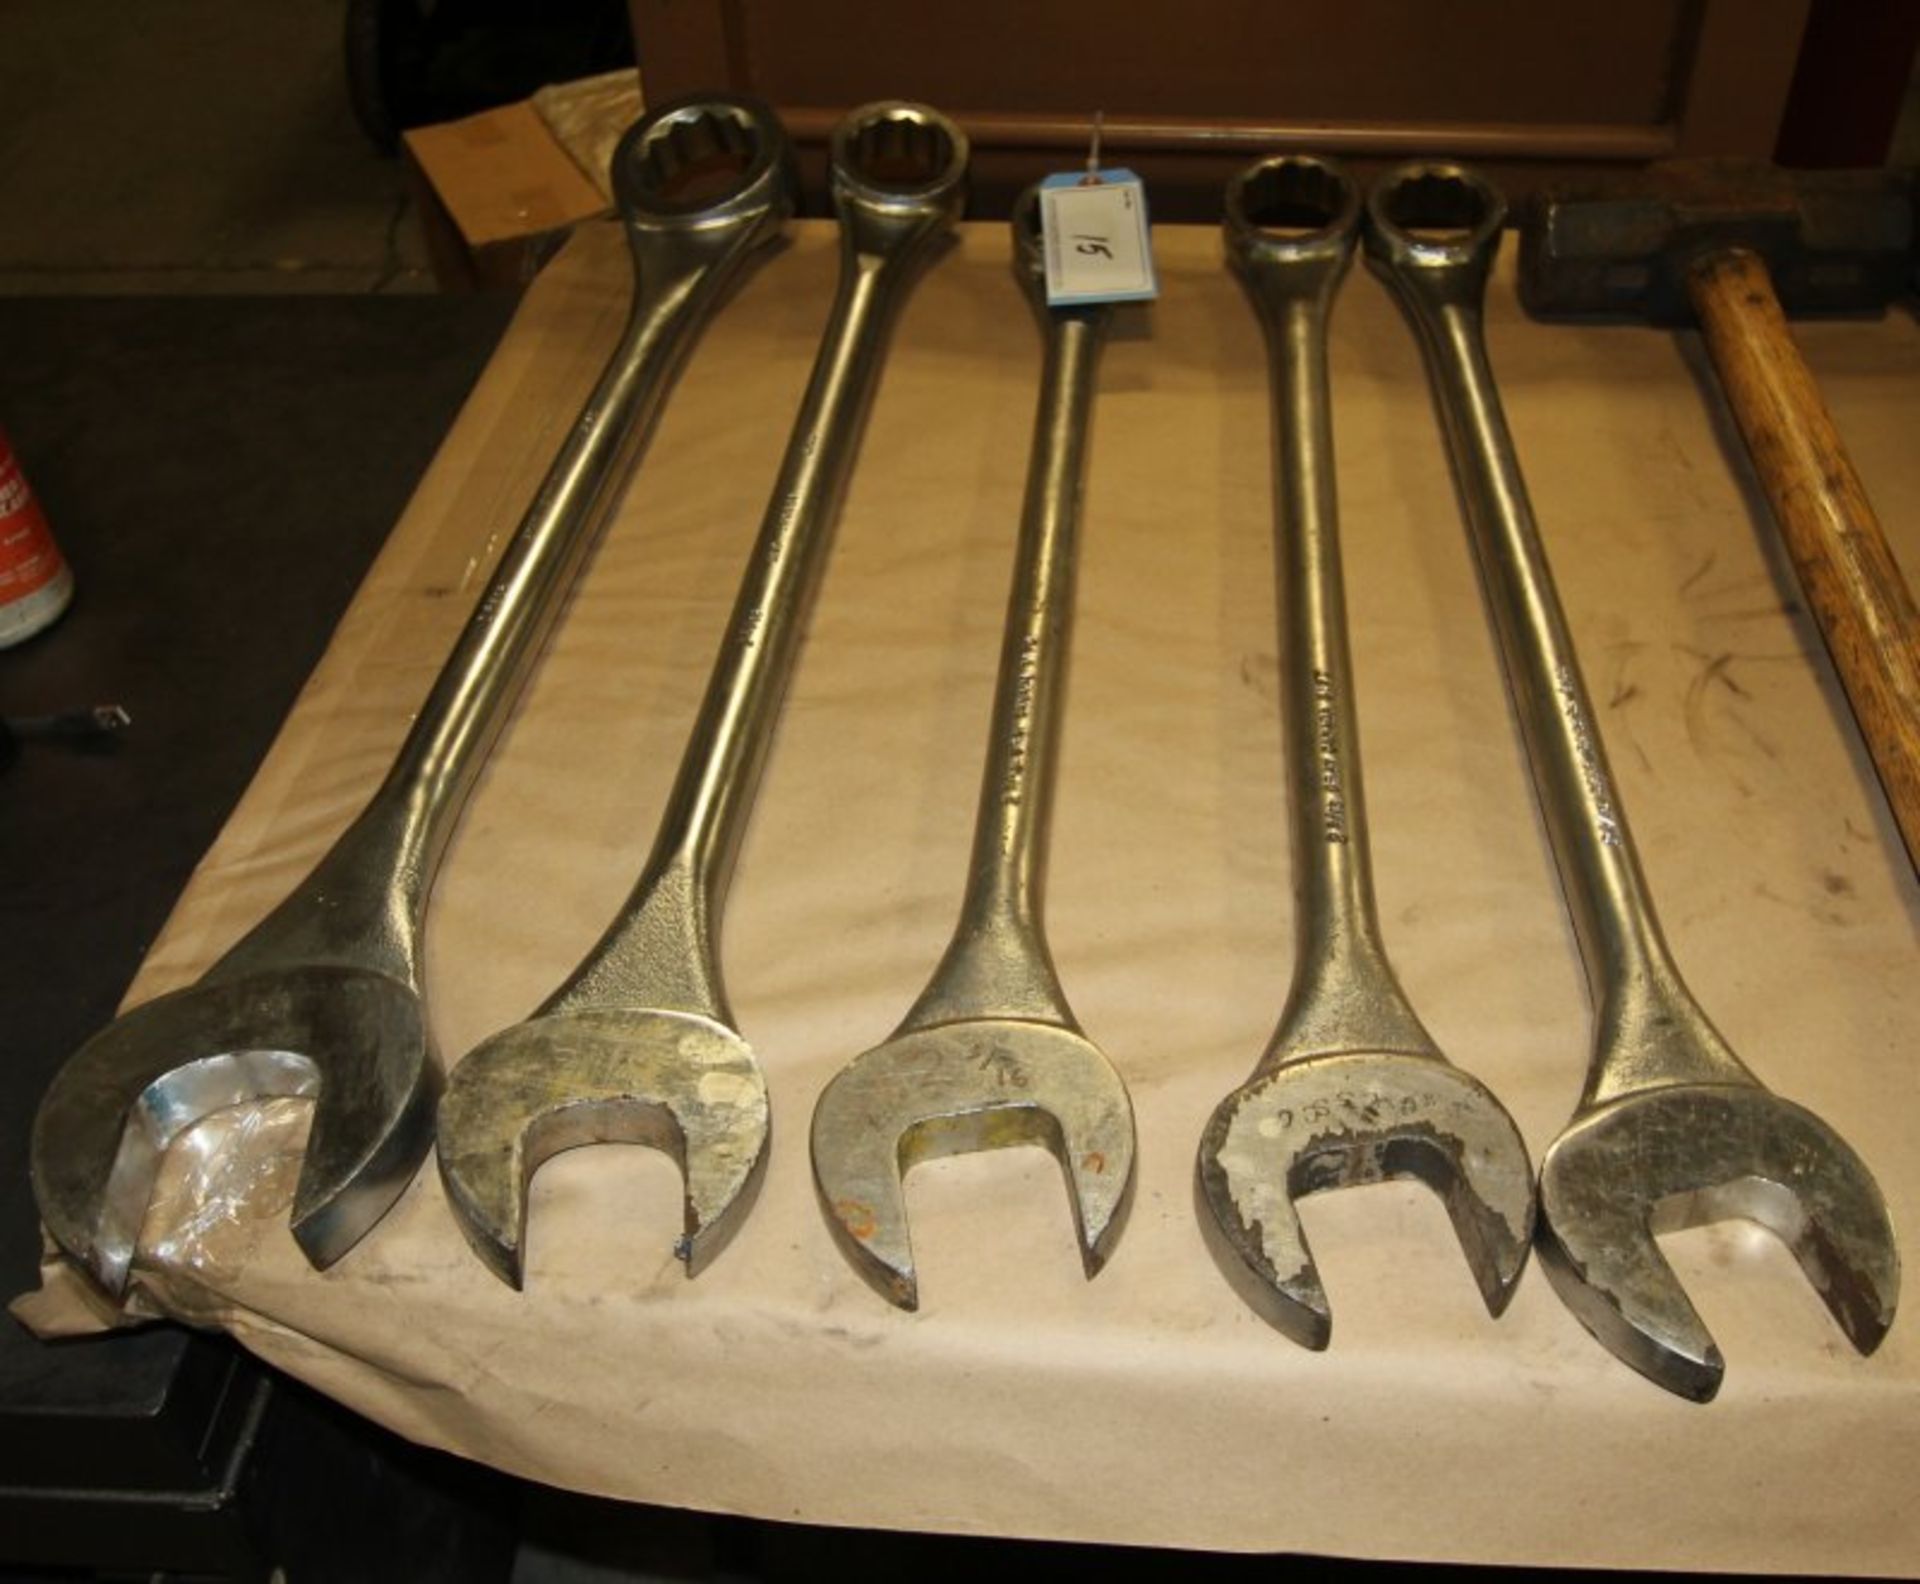 L/O 5 OPEN END WRENCHES, 2 1/16,2 3/16,2 3/8,2 9/16, 2 1/16